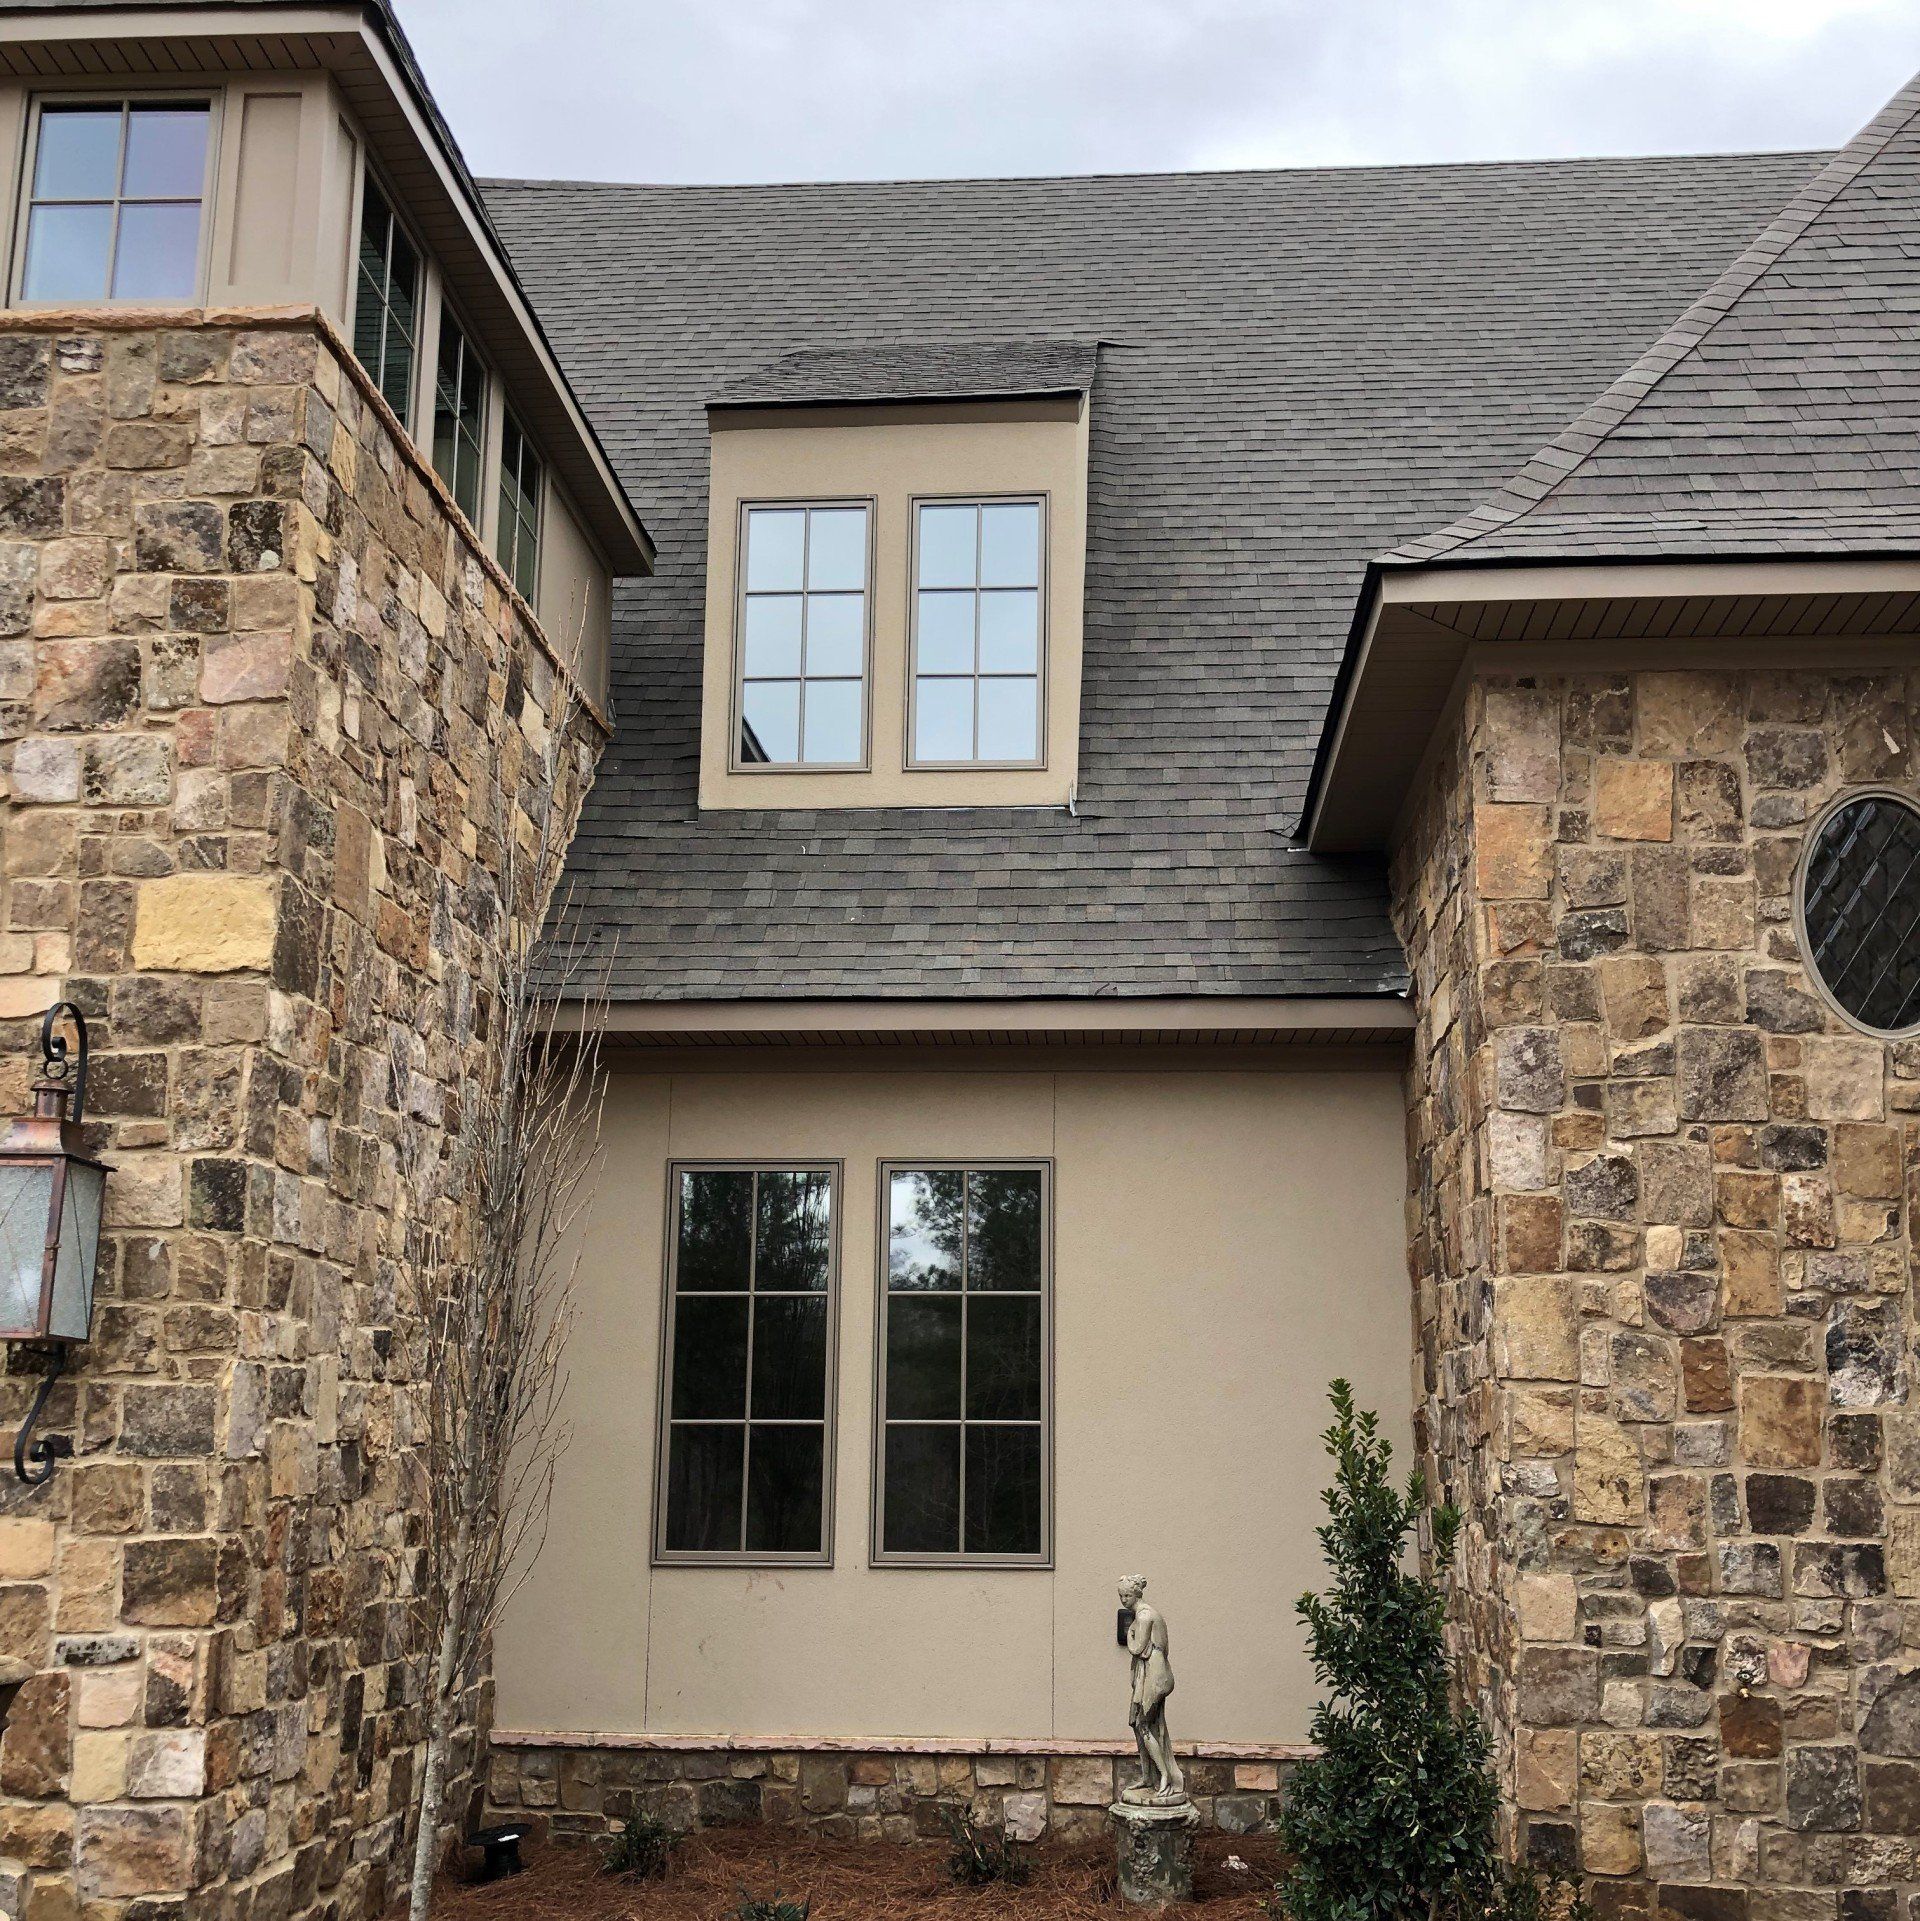 Residential tint service  - After home tinted on 2.1.2019 in Auburn, AL